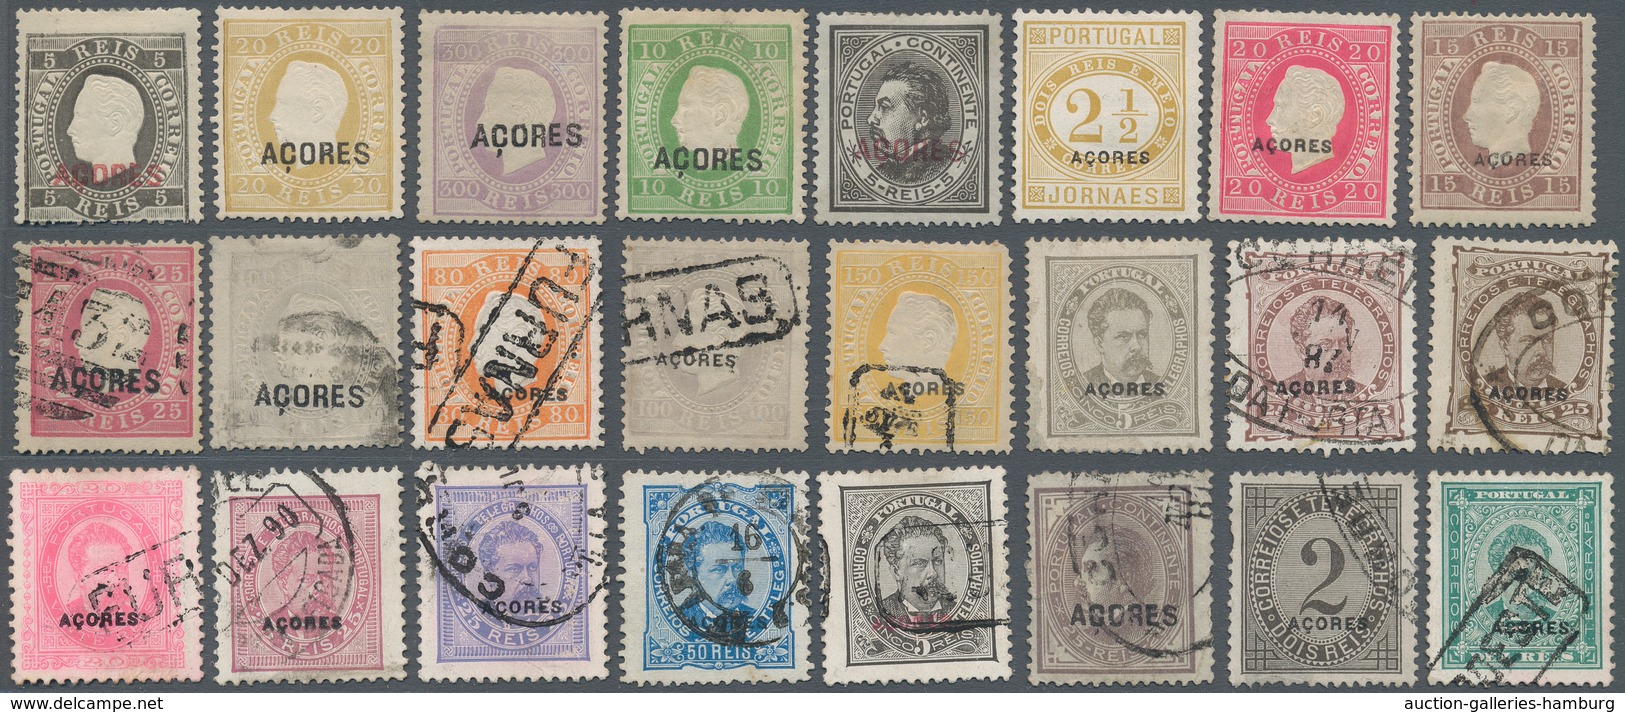 Portugal - Azoren: 1871 - 1890, 24 Values Unused And Used, Various Condition, Partly Thin Spots. - Azores